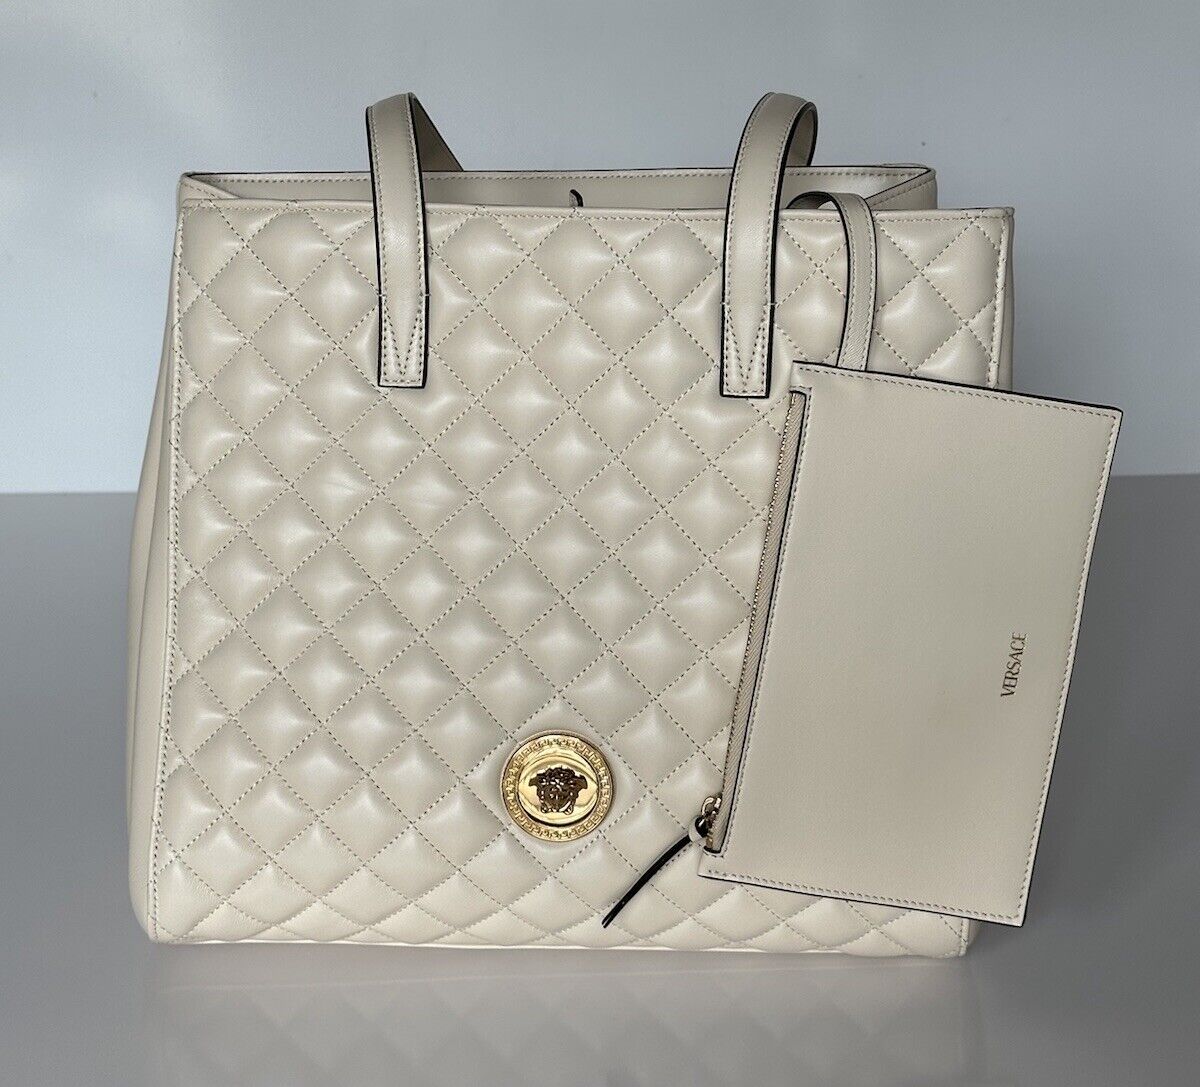 Versace Medusa Quilted Lamb Leather Off-White Tote Bag 1013789 IT NWT $1700